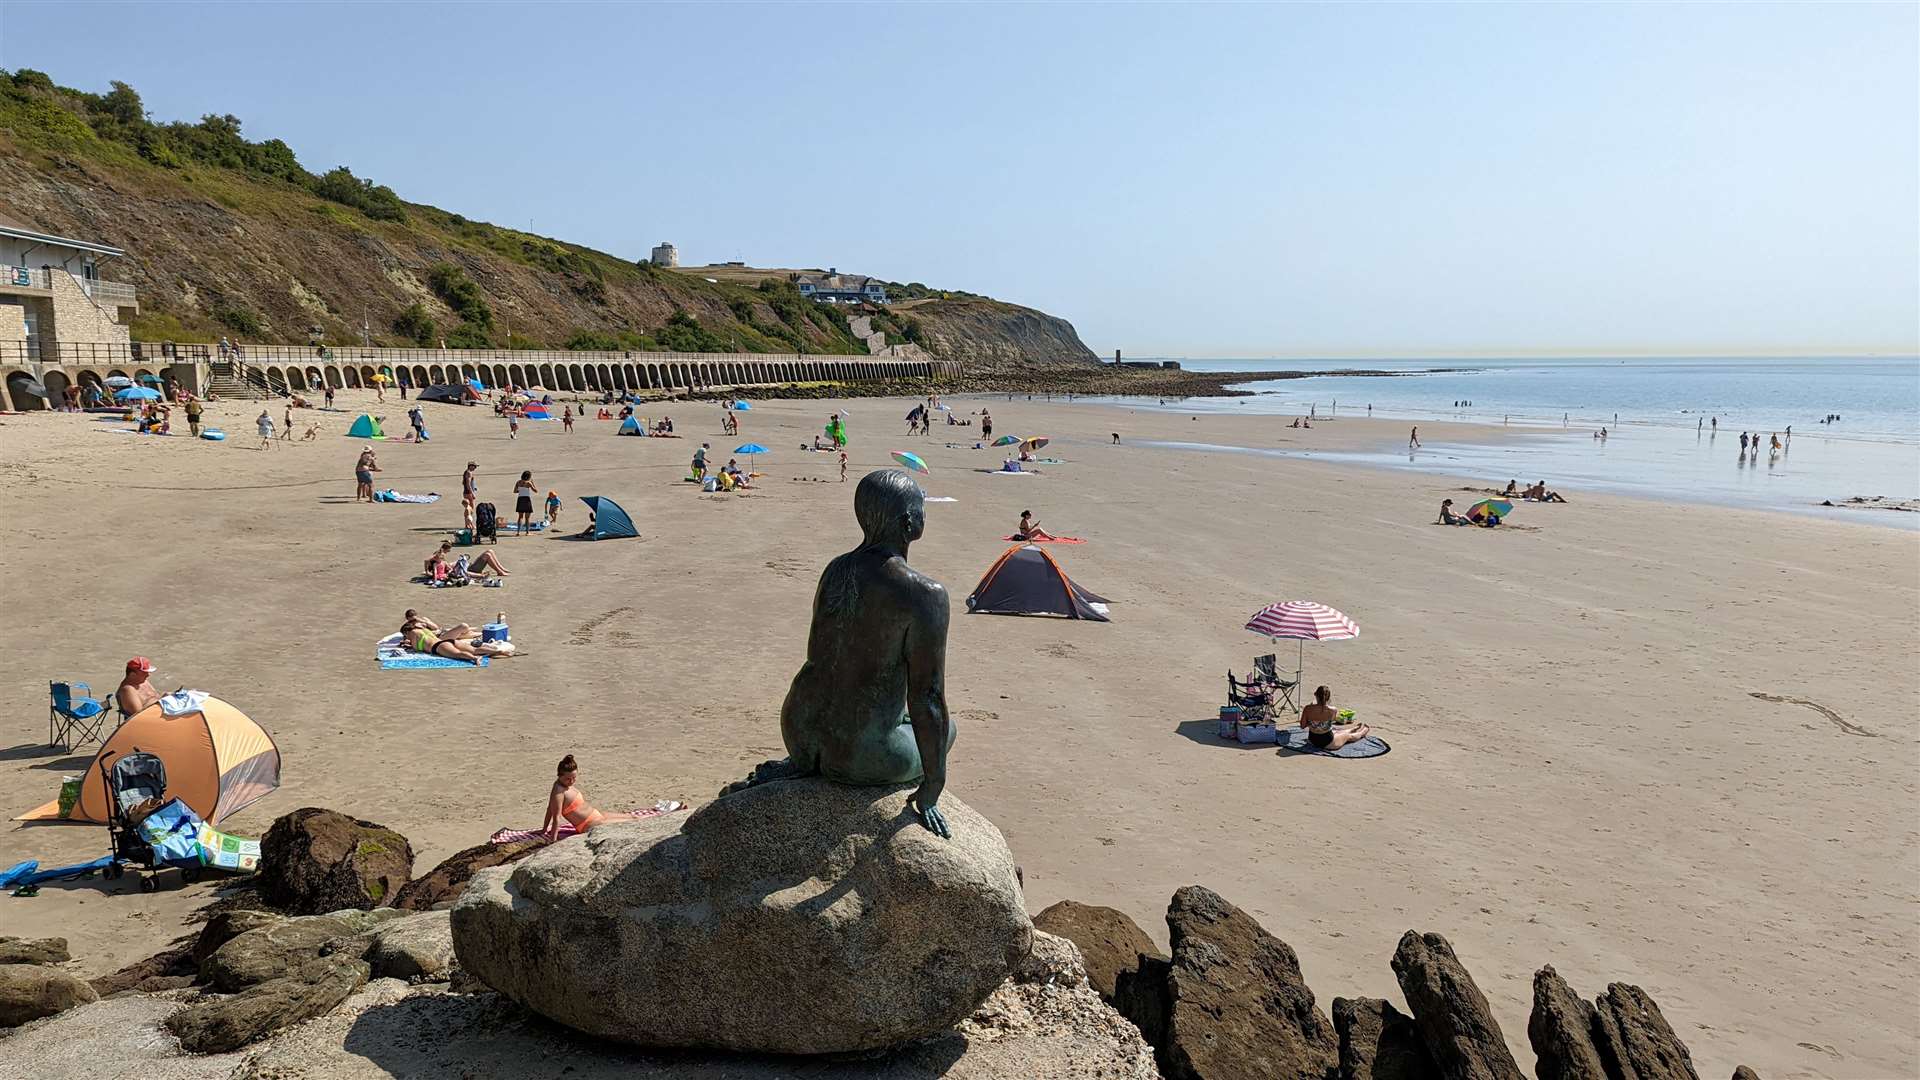 Sunny Sands beach in Folkestone has been named one of the best in Europe